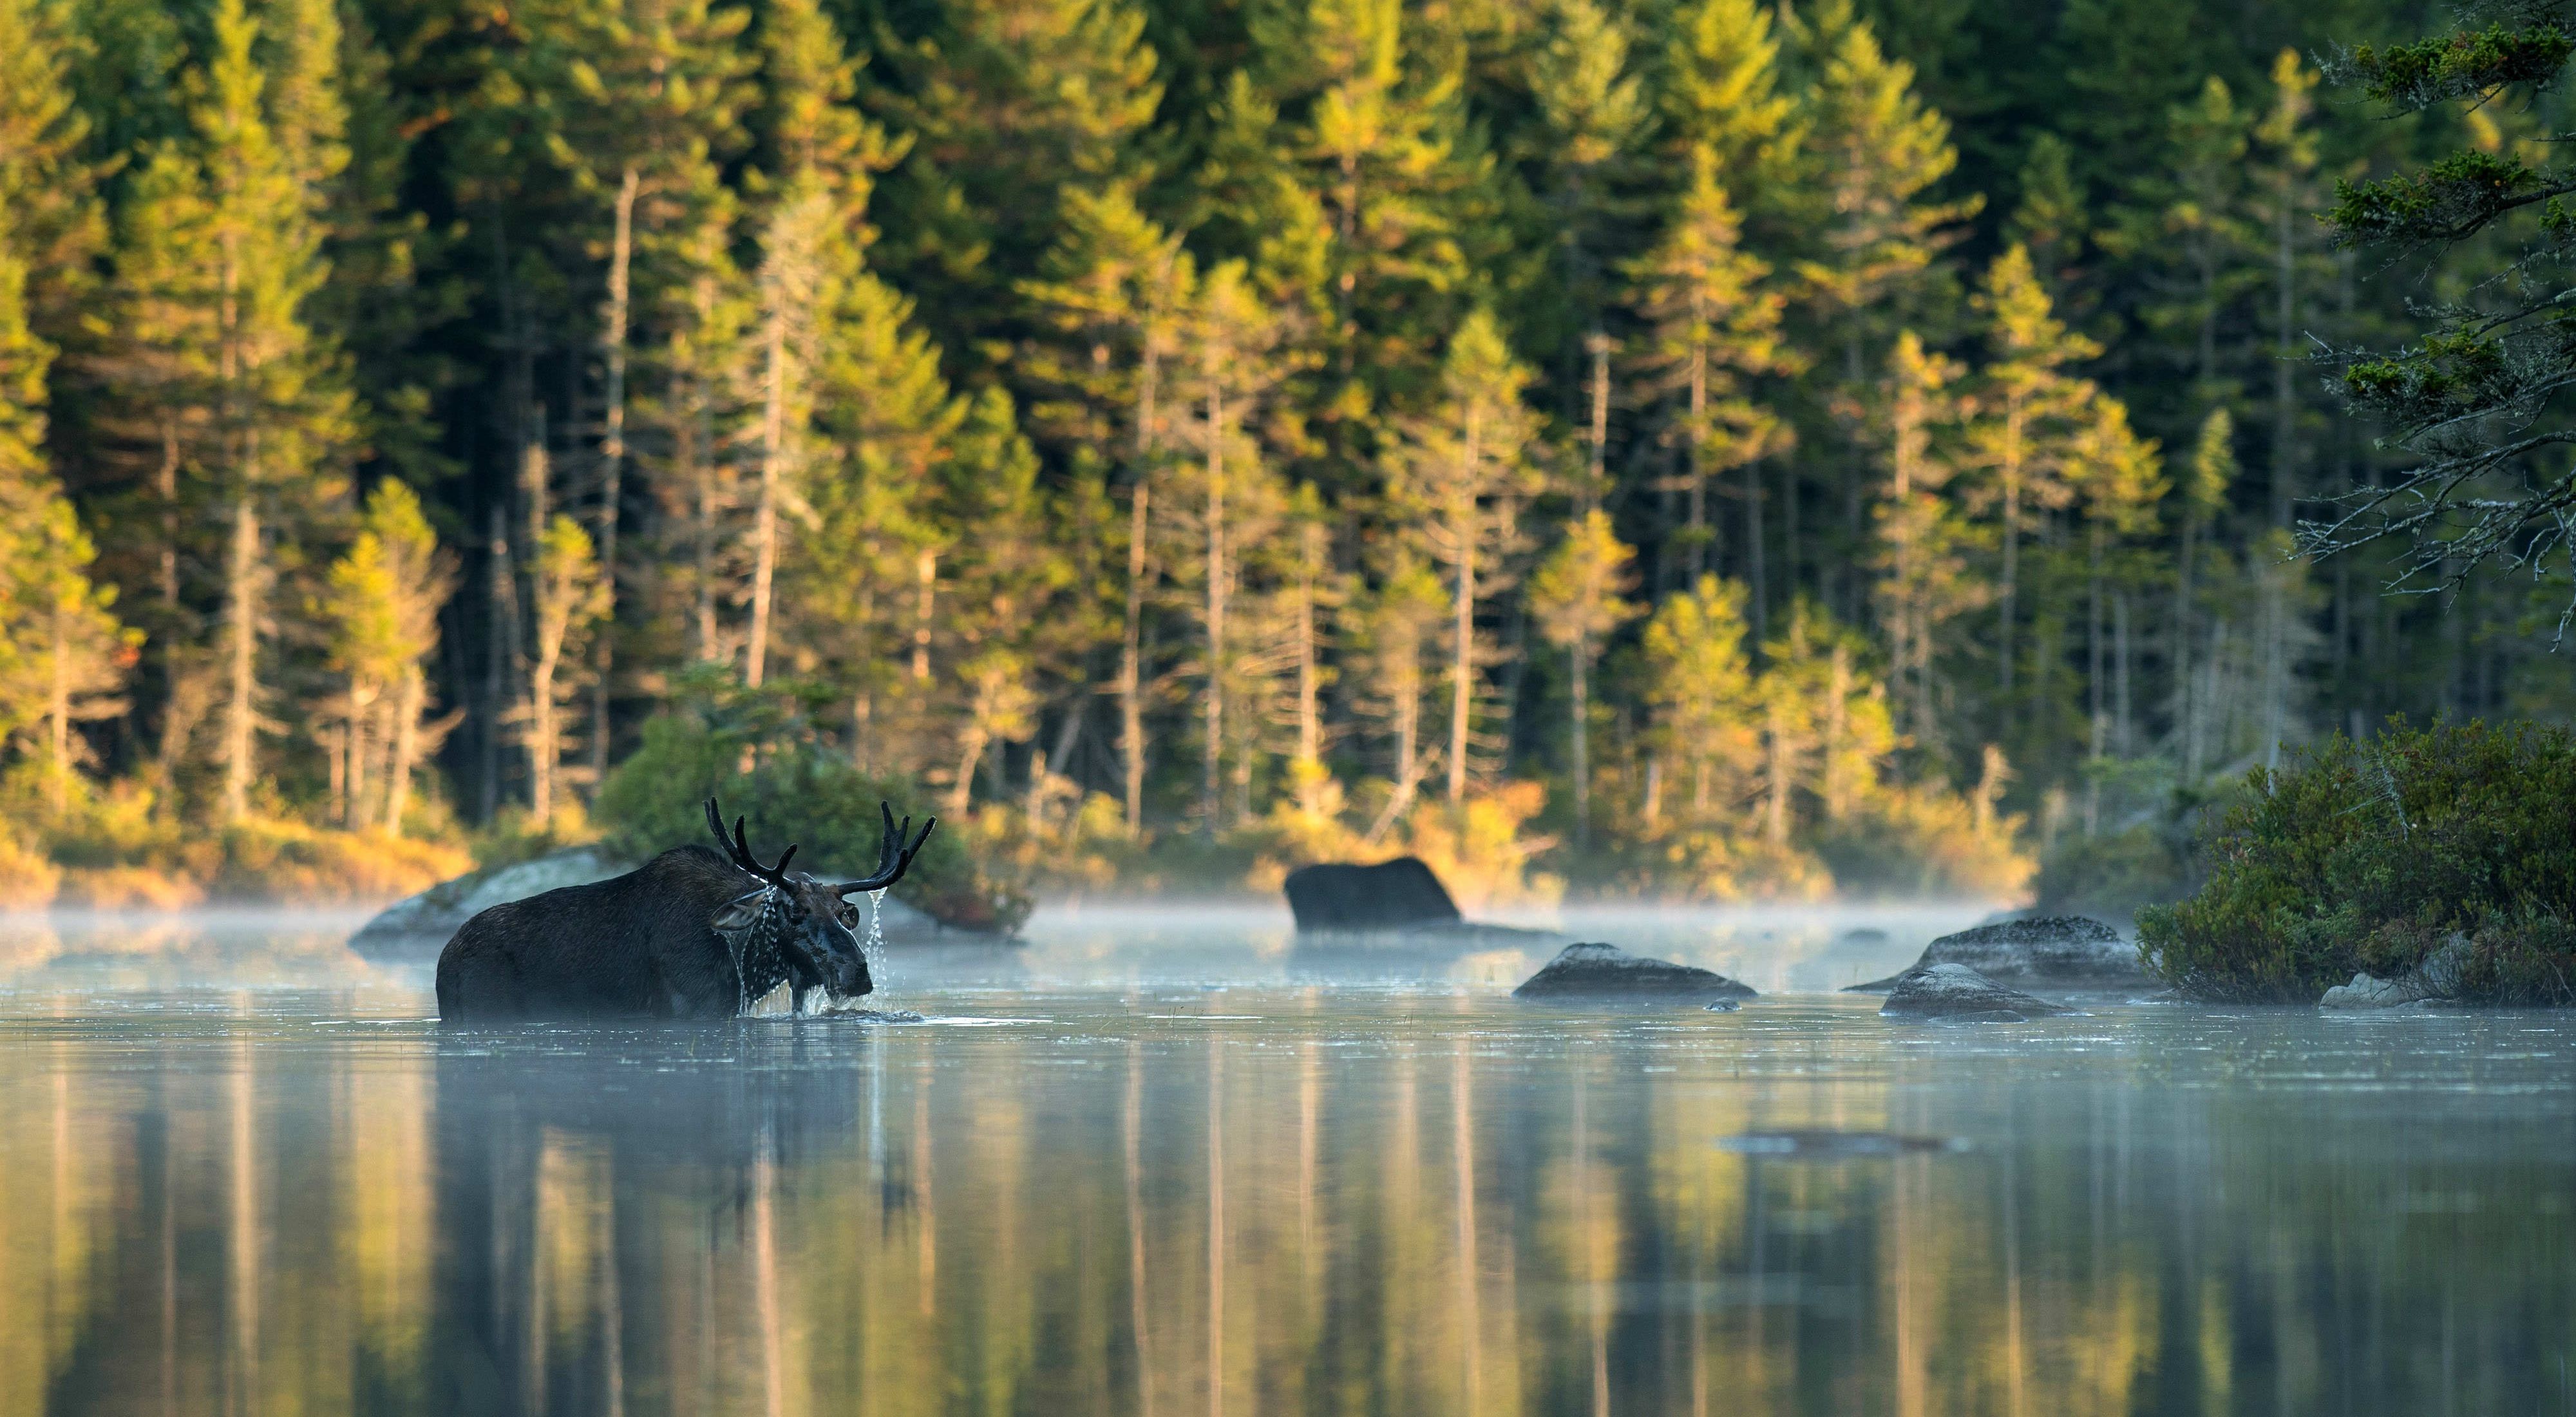 Moose wading in the water.